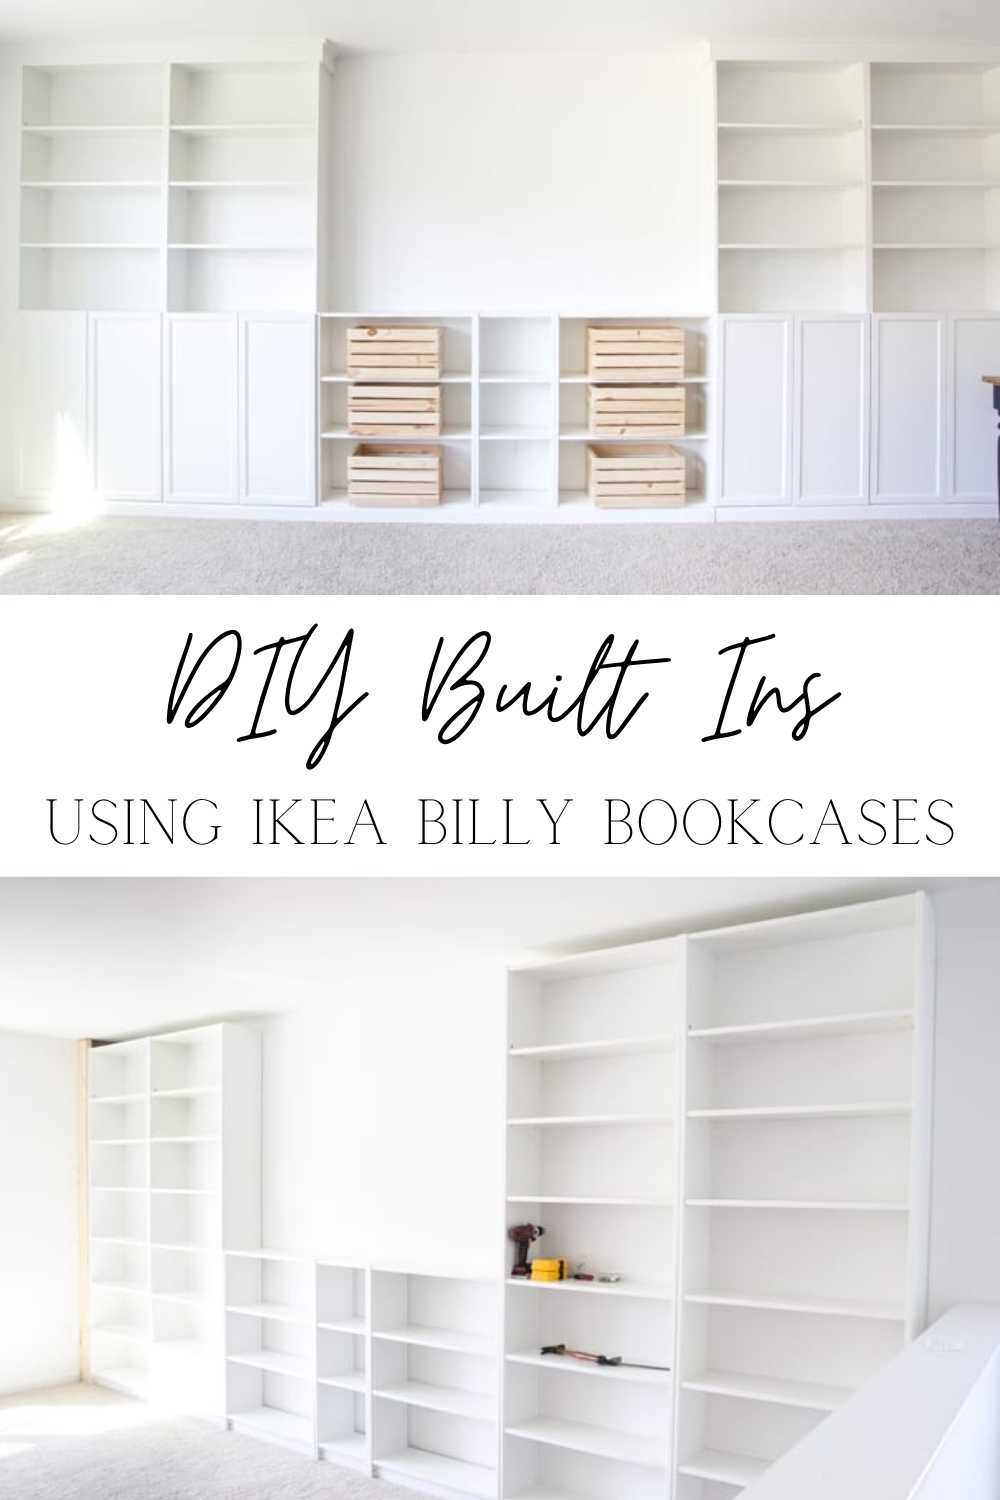 DIY Built Ins from IKEA Billy Bookcases | A step-by-step tutorial for how to make professional looking built in bookshelves using IKEA Billy bookcases for vertical storage.